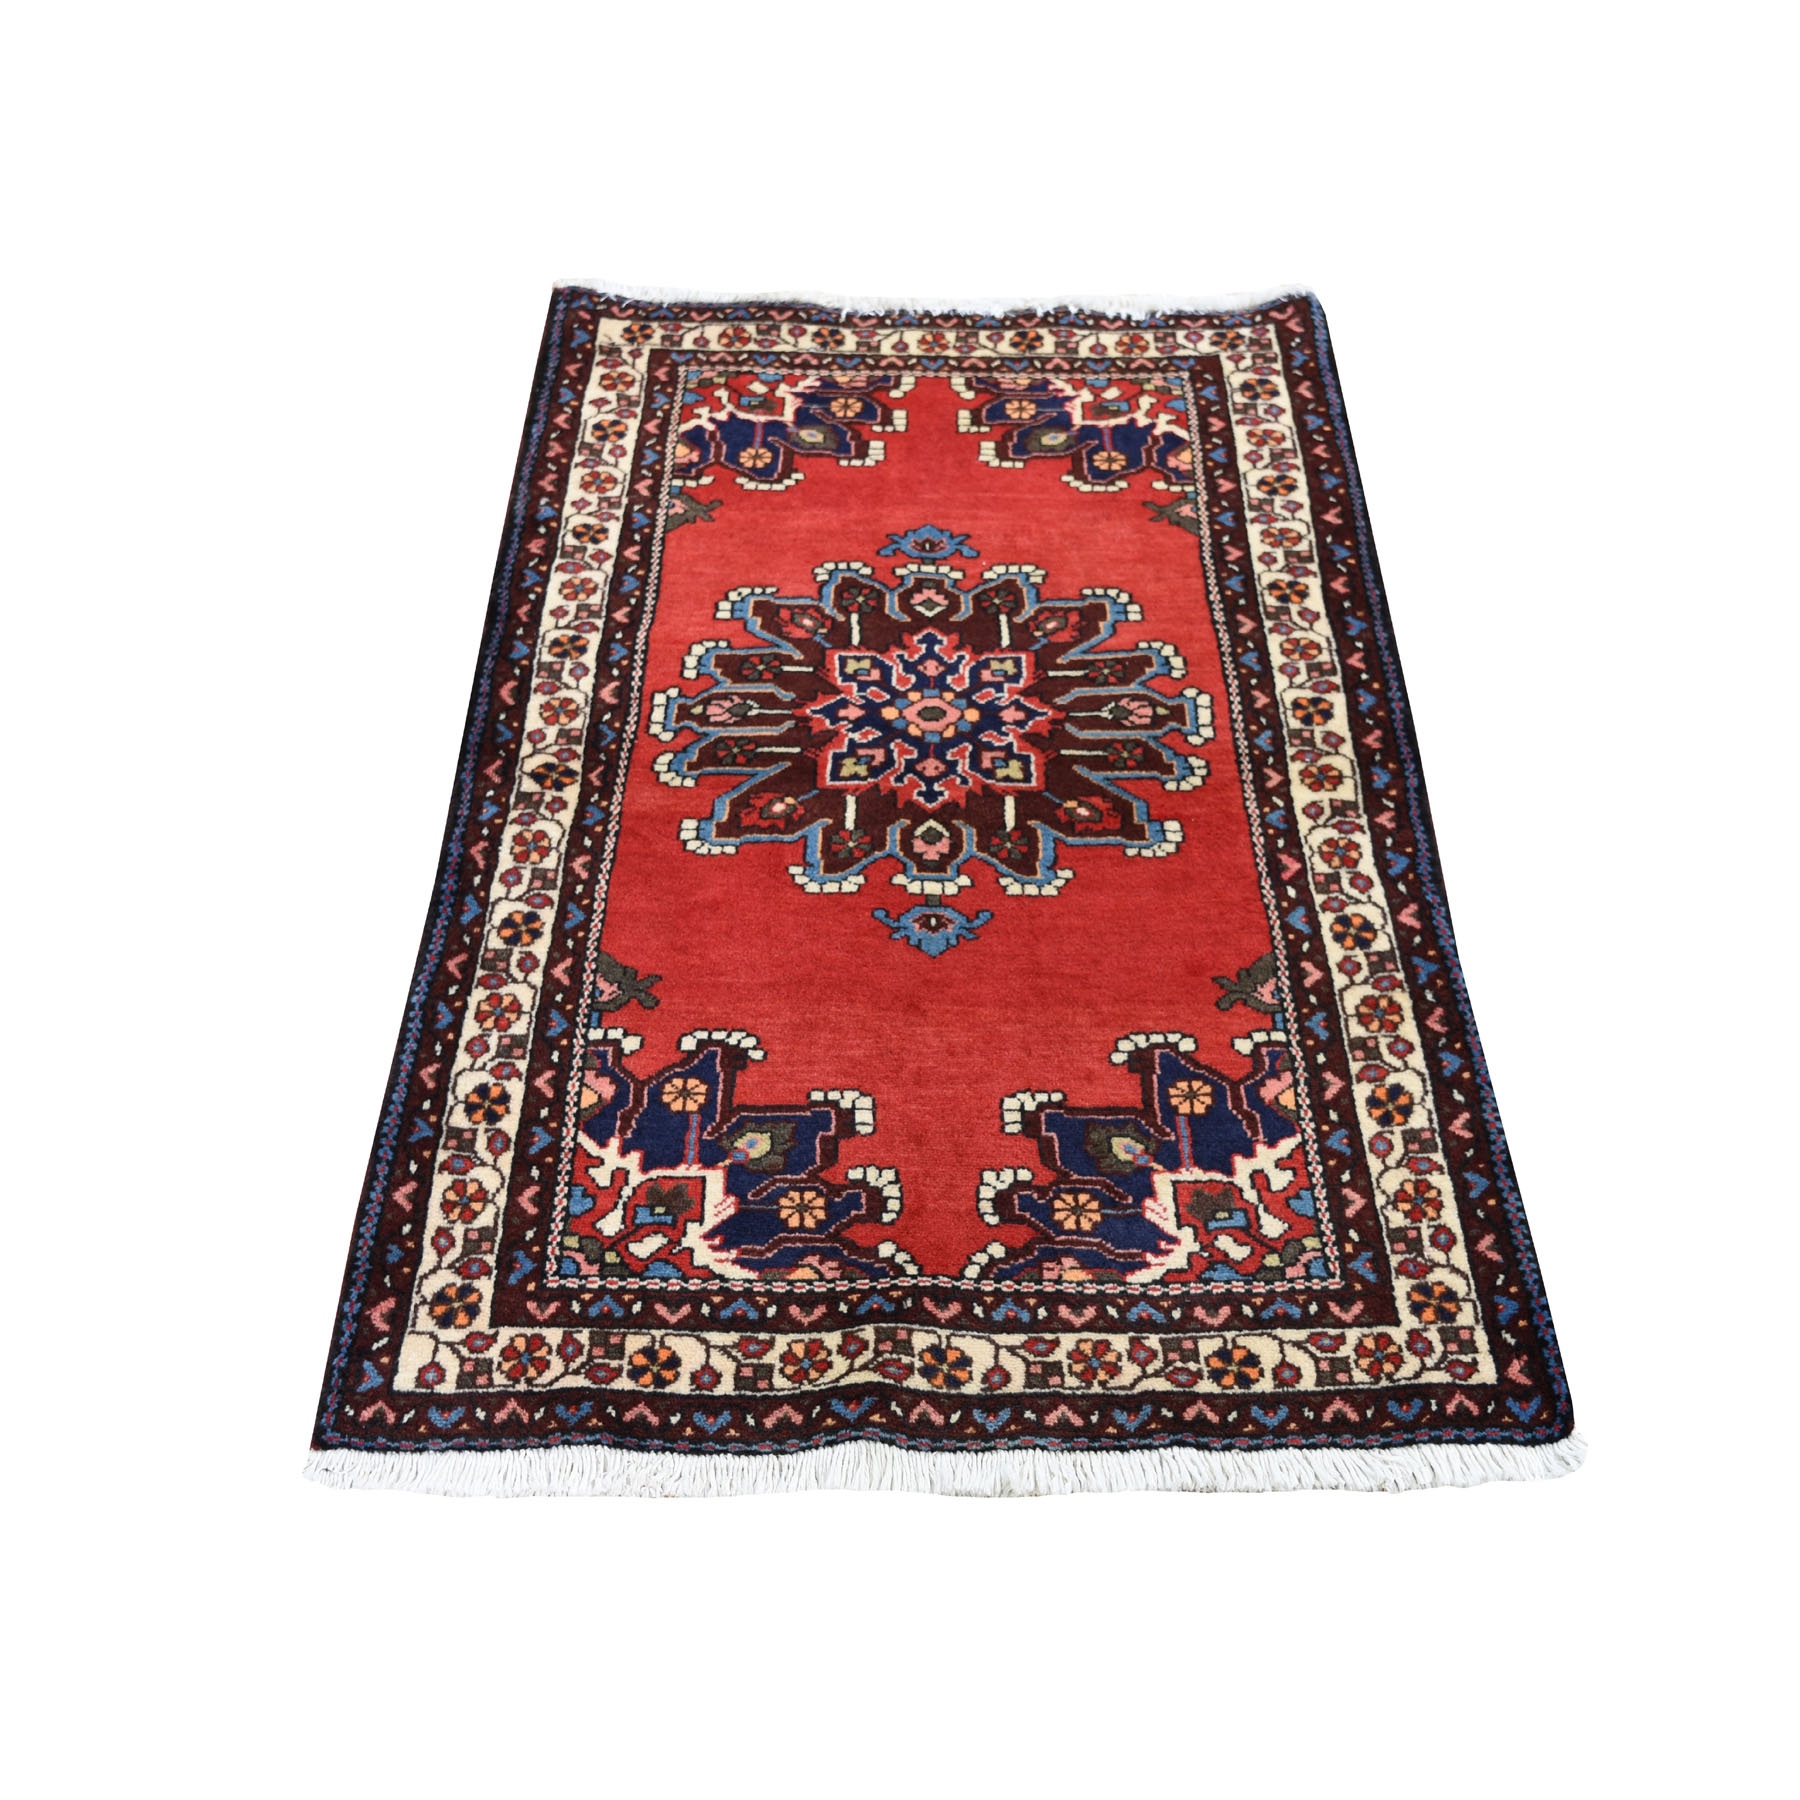 3-x4- Red New Persian Bakhtiari Pure Wool Hand Knotted Oriental Rug 